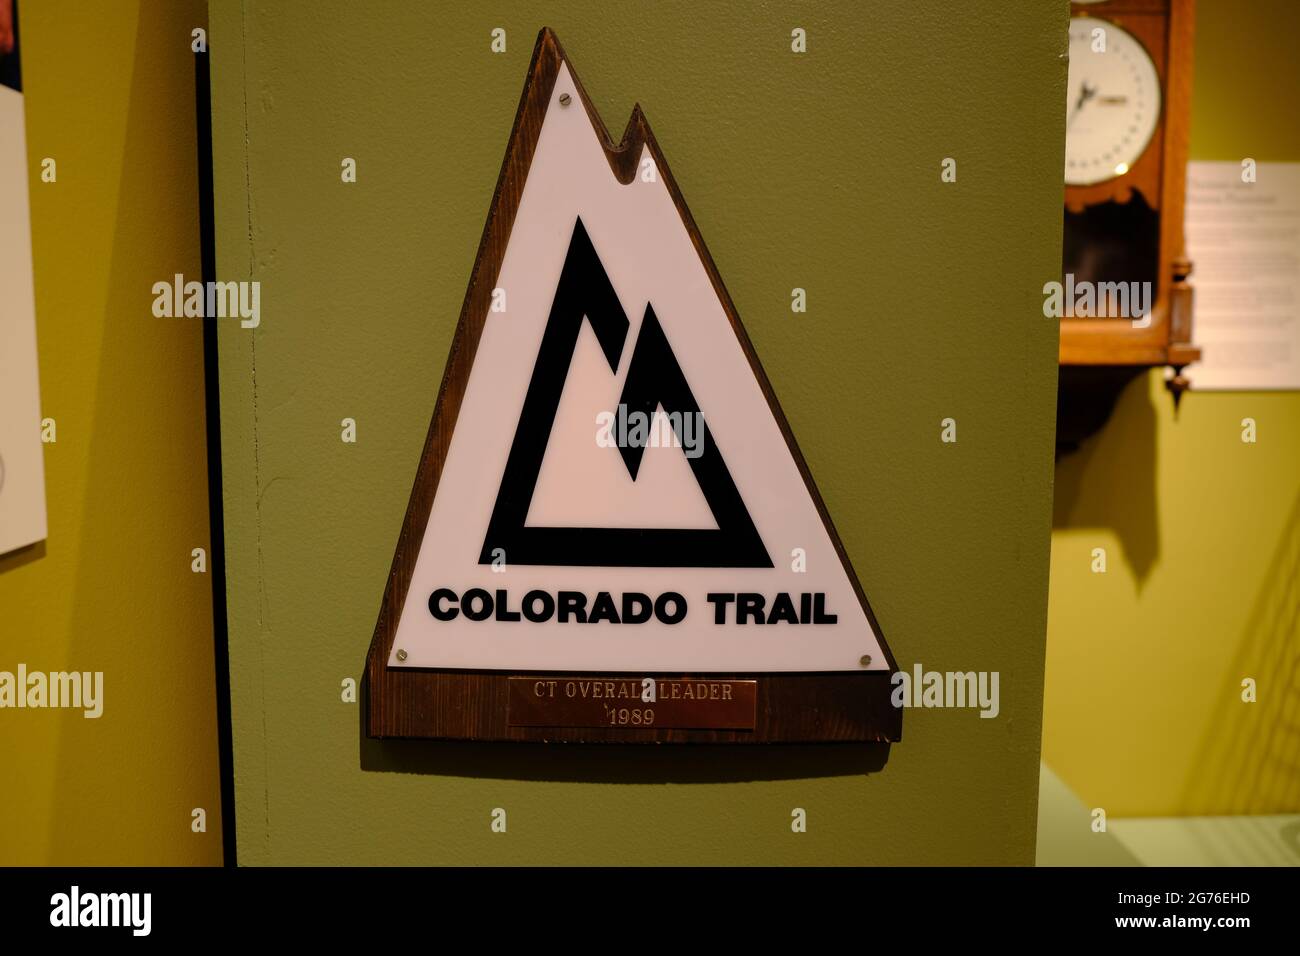 1989 Colorado Trail Wood Plaque CT Overall Leader Stock Photo